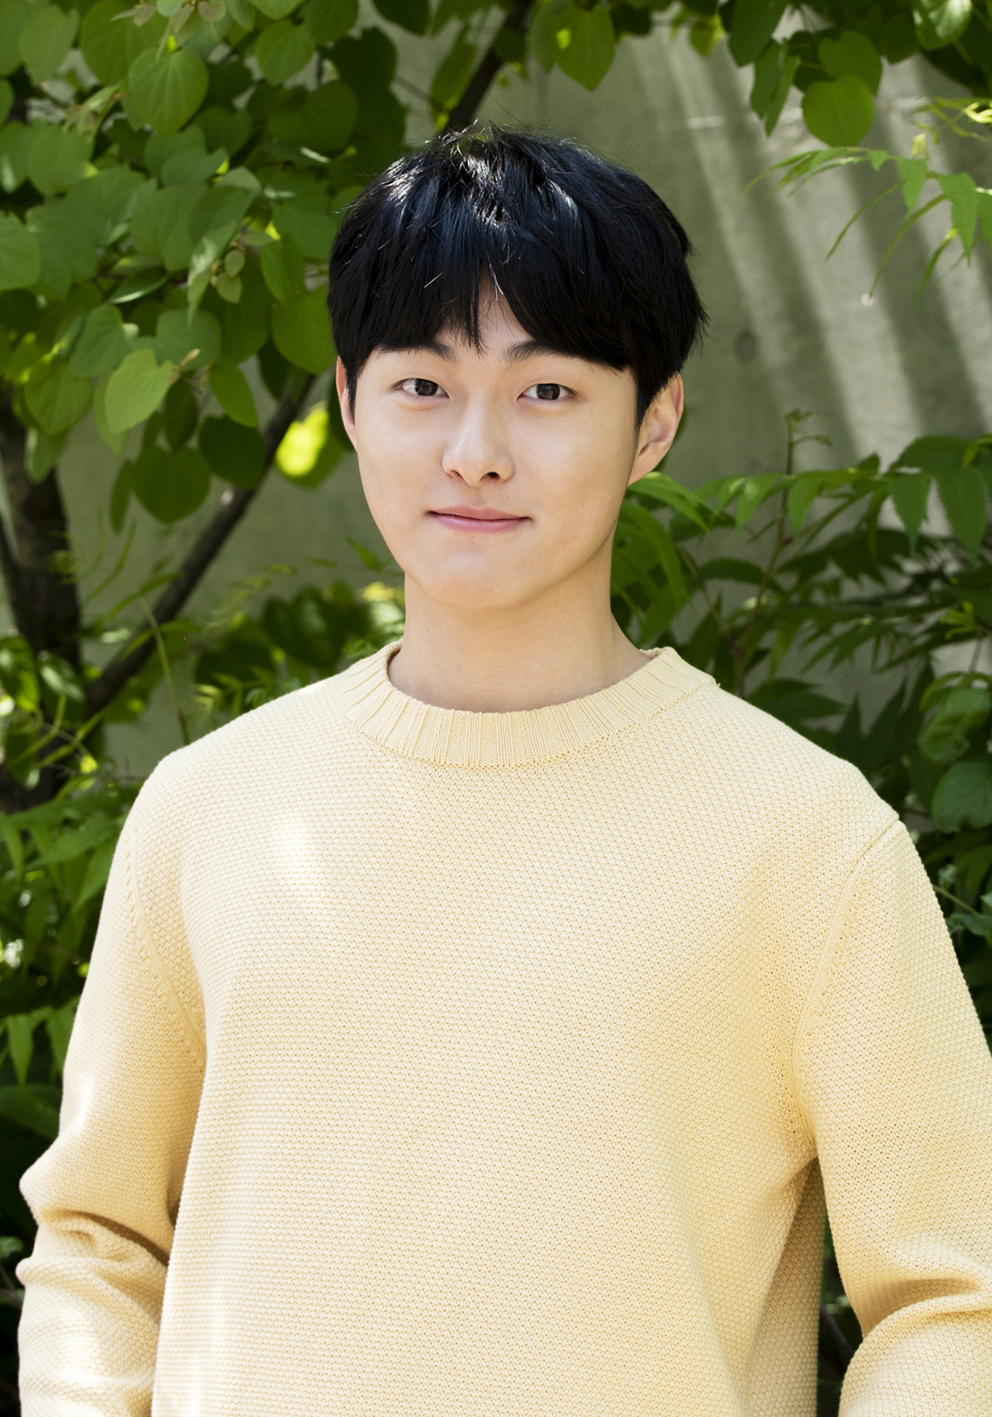 Yoon Chan-Young cast in Netflix drama series “All of Us Are Dead”